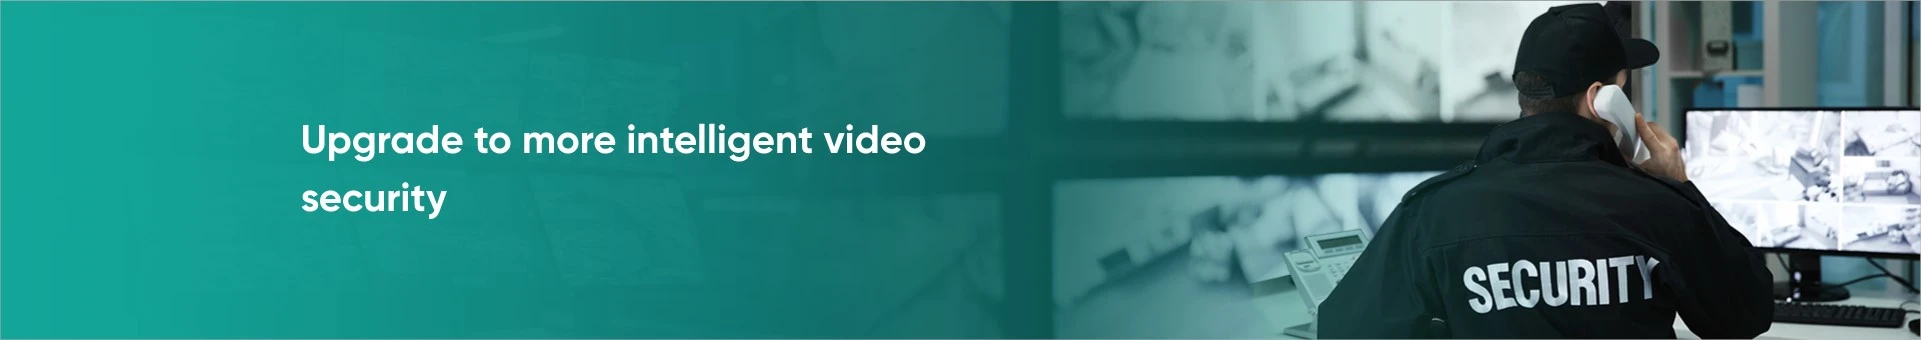 Upgrade to more intelligent video security